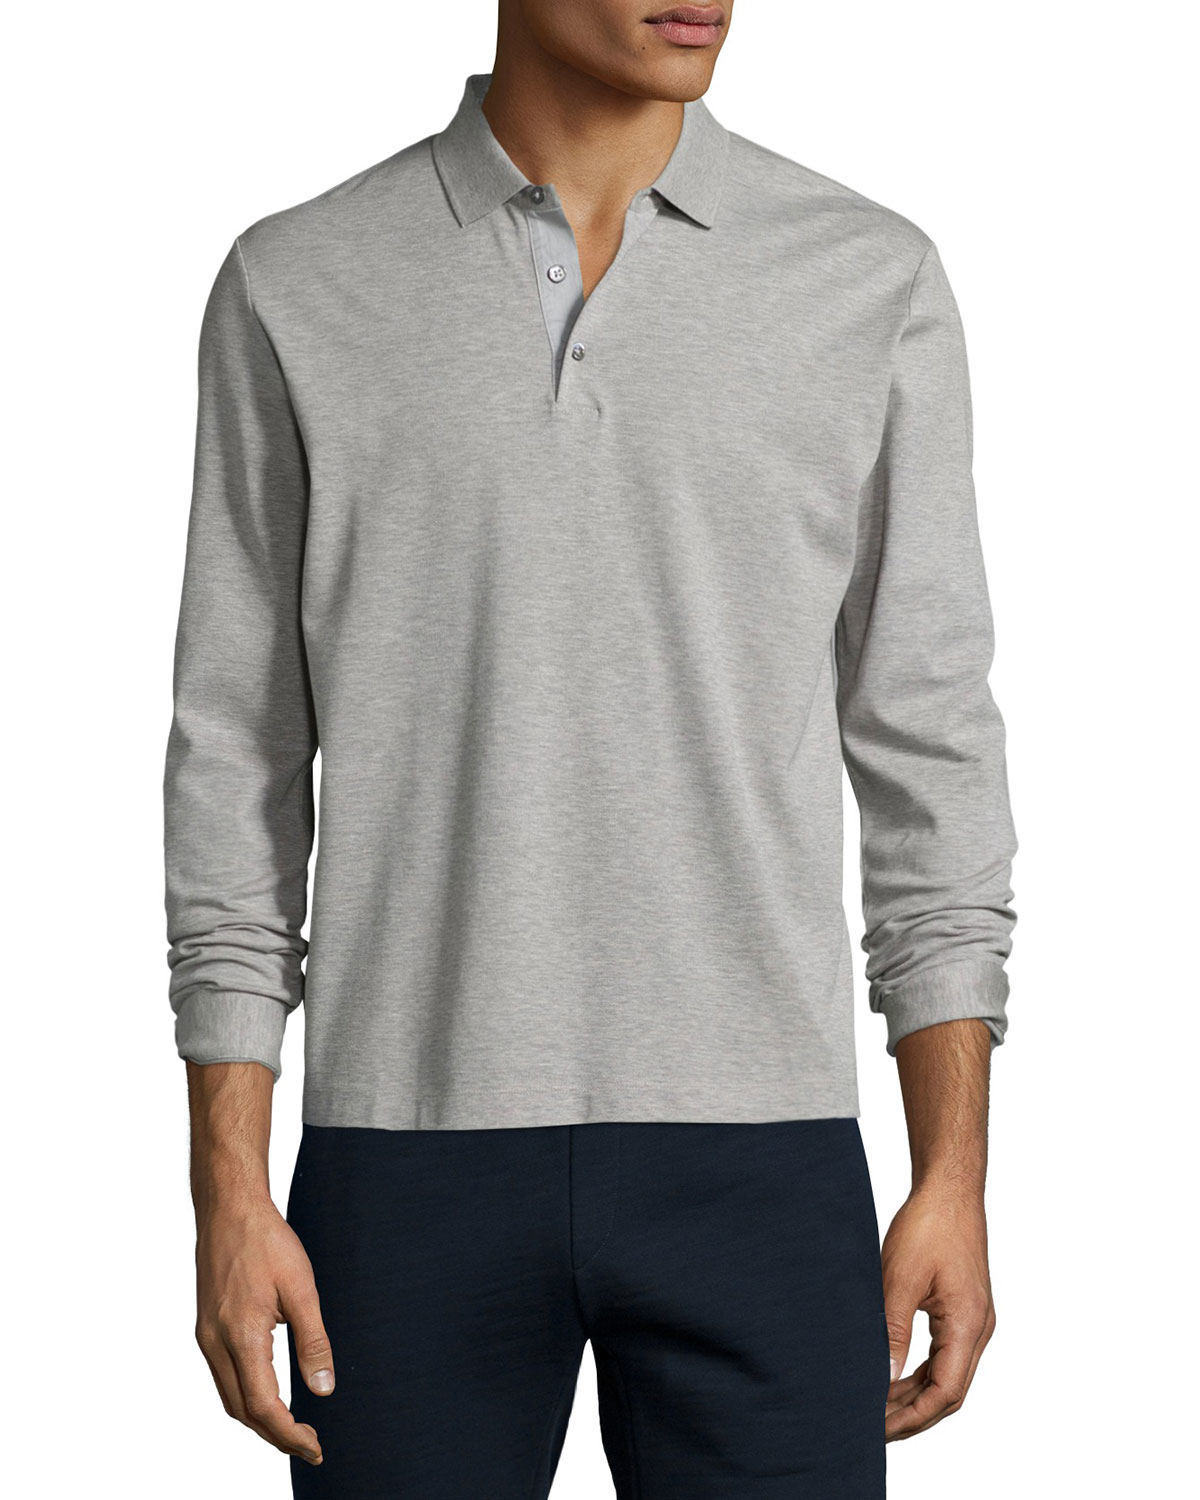 Lyst - Theory Long-sleeve Knit Pique Polo Shirt in Natural for Men